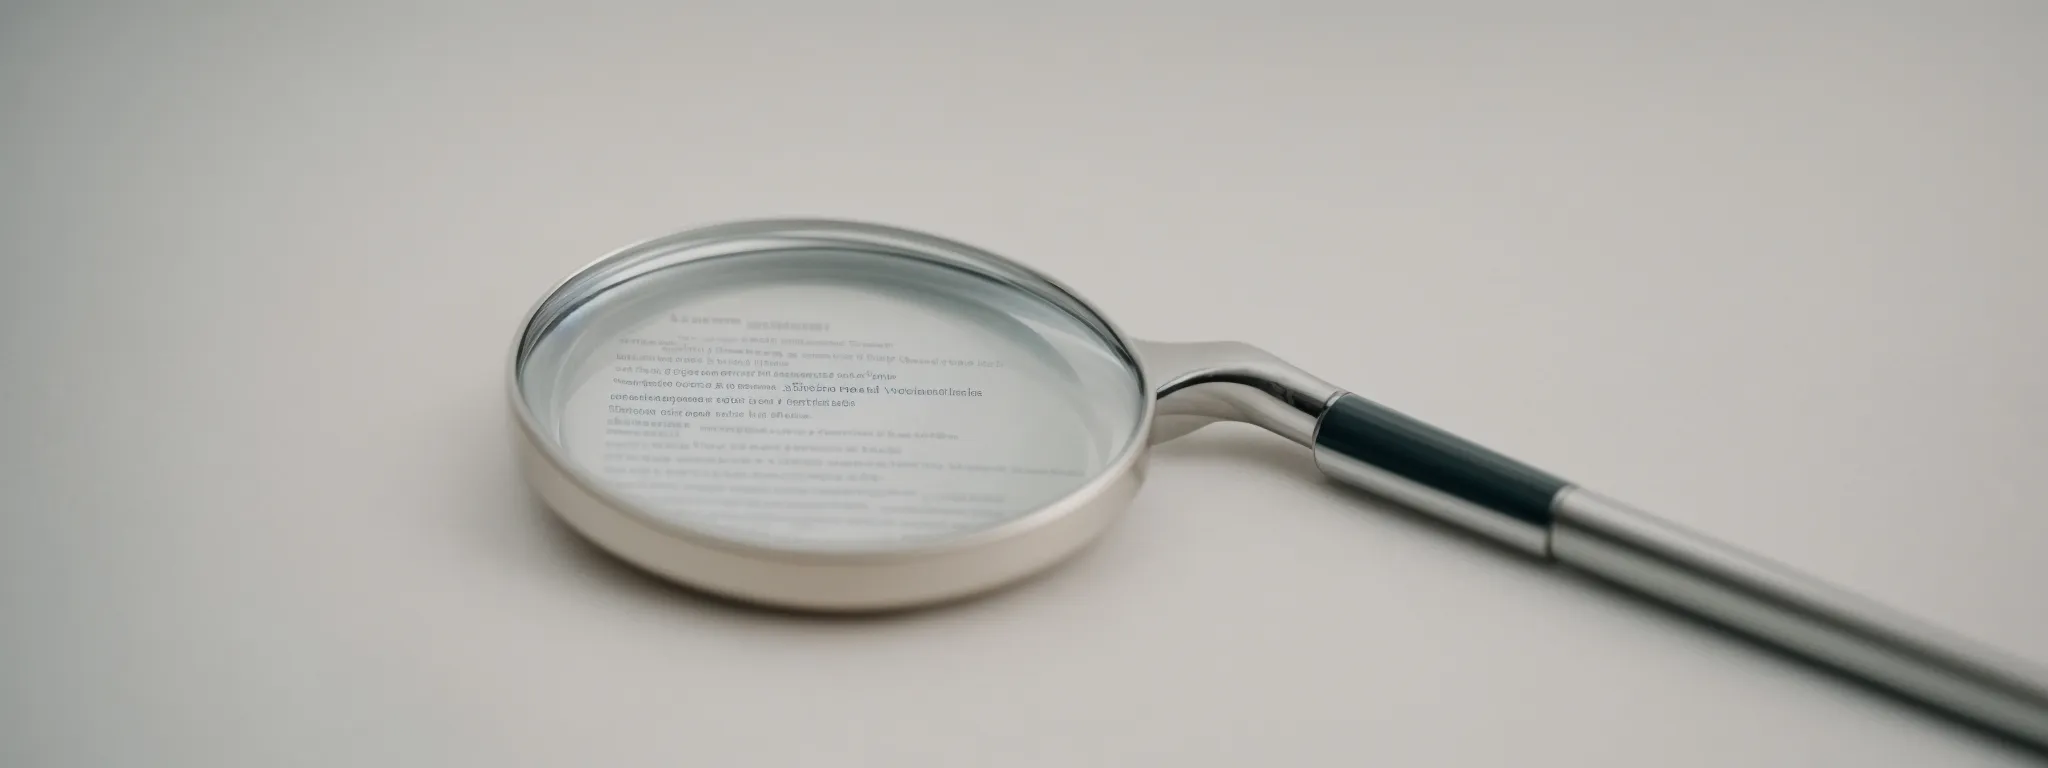 a close-up of a magnifying glass hovering over a web page, symbolizing the scrutiny of search engine algorithms.